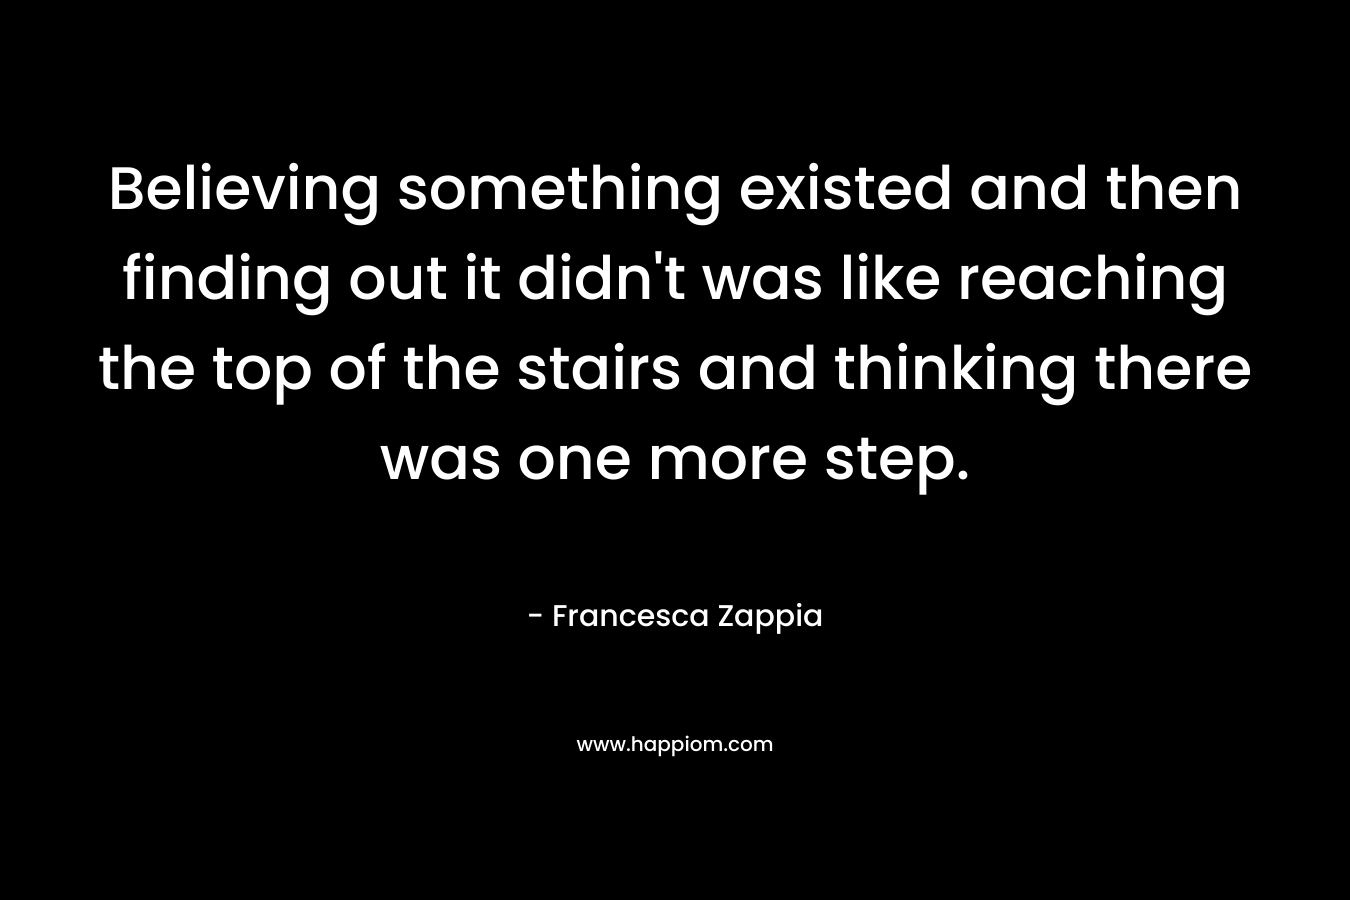 Believing something existed and then finding out it didn’t was like reaching the top of the stairs and thinking there was one more step. – Francesca Zappia